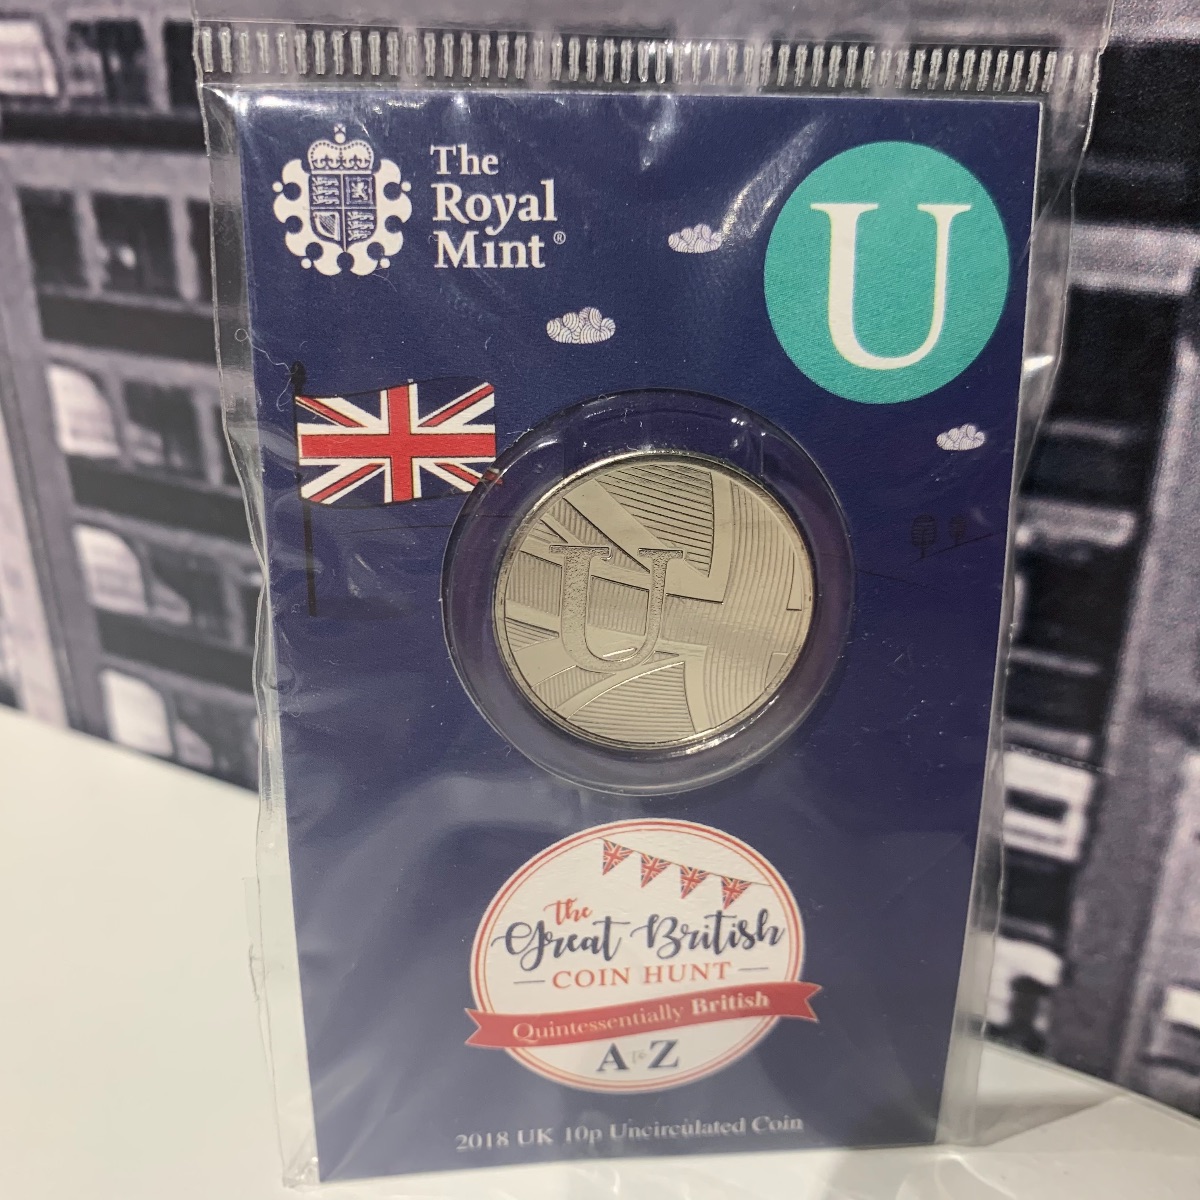 U for Unionjack 10p Coin Alphabet Letter Uncirculated Great British Hunt A-Z UK18UUNR 5026177404088 (Brand New & Sealed)